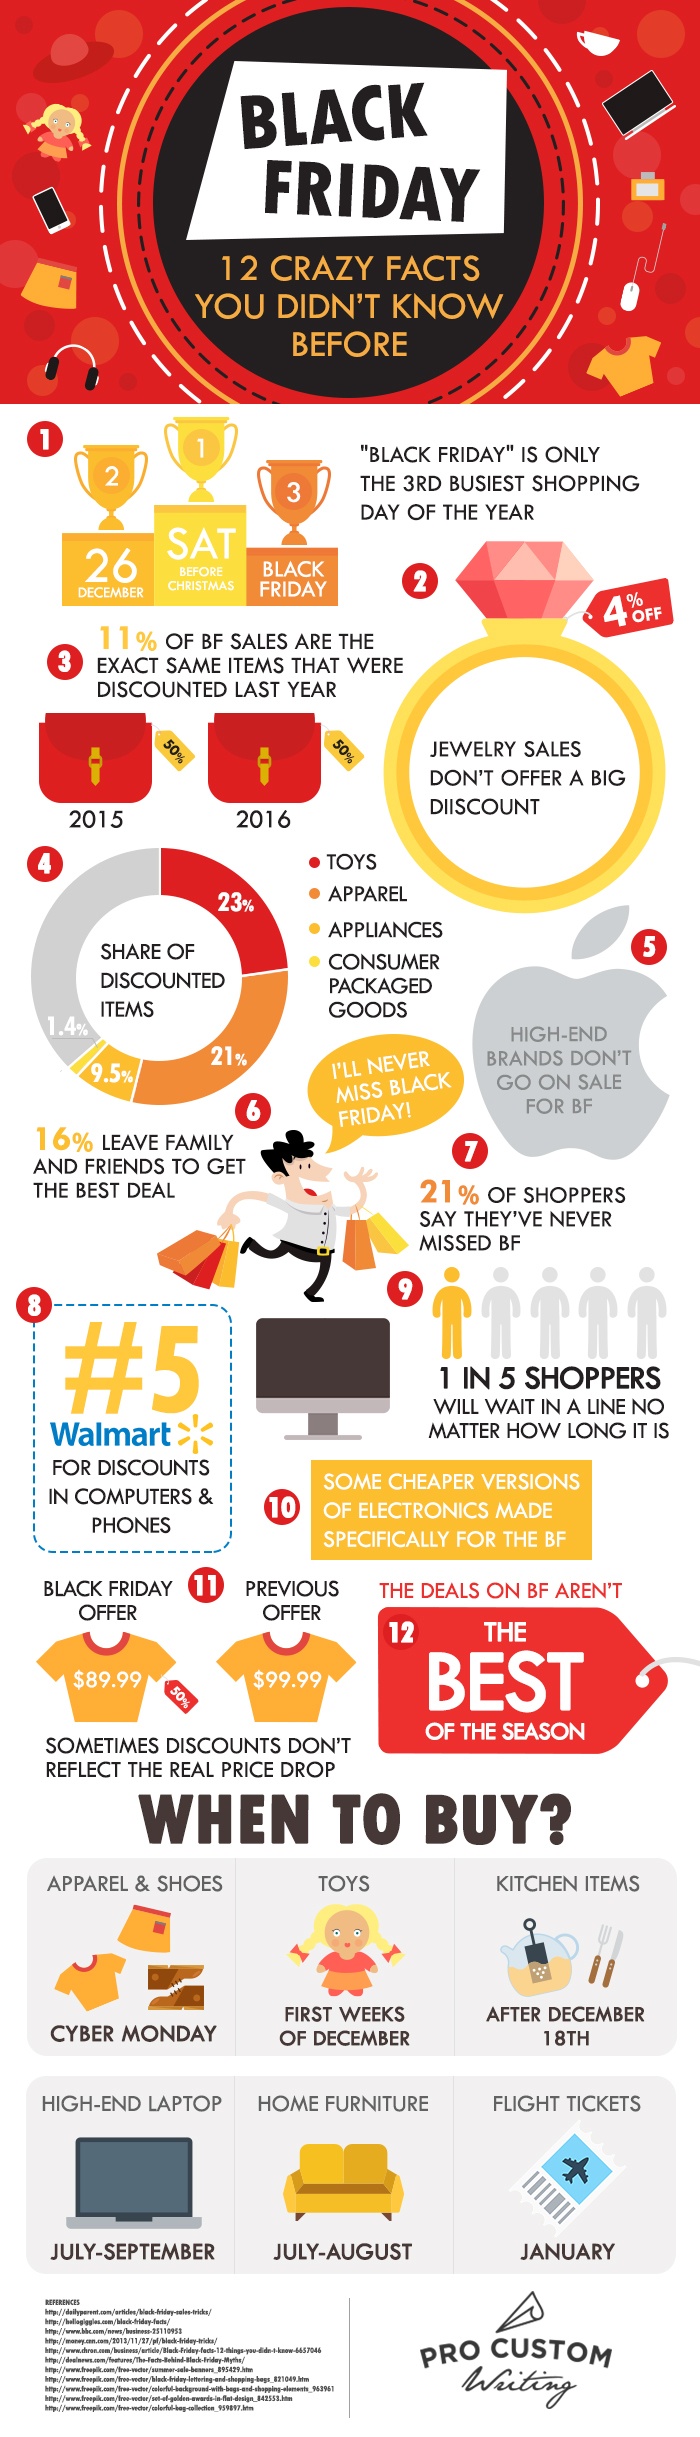 Black Friday: 12 Crazy Facts You Didn't Know Before - Why Do Black Friday Deals Suck